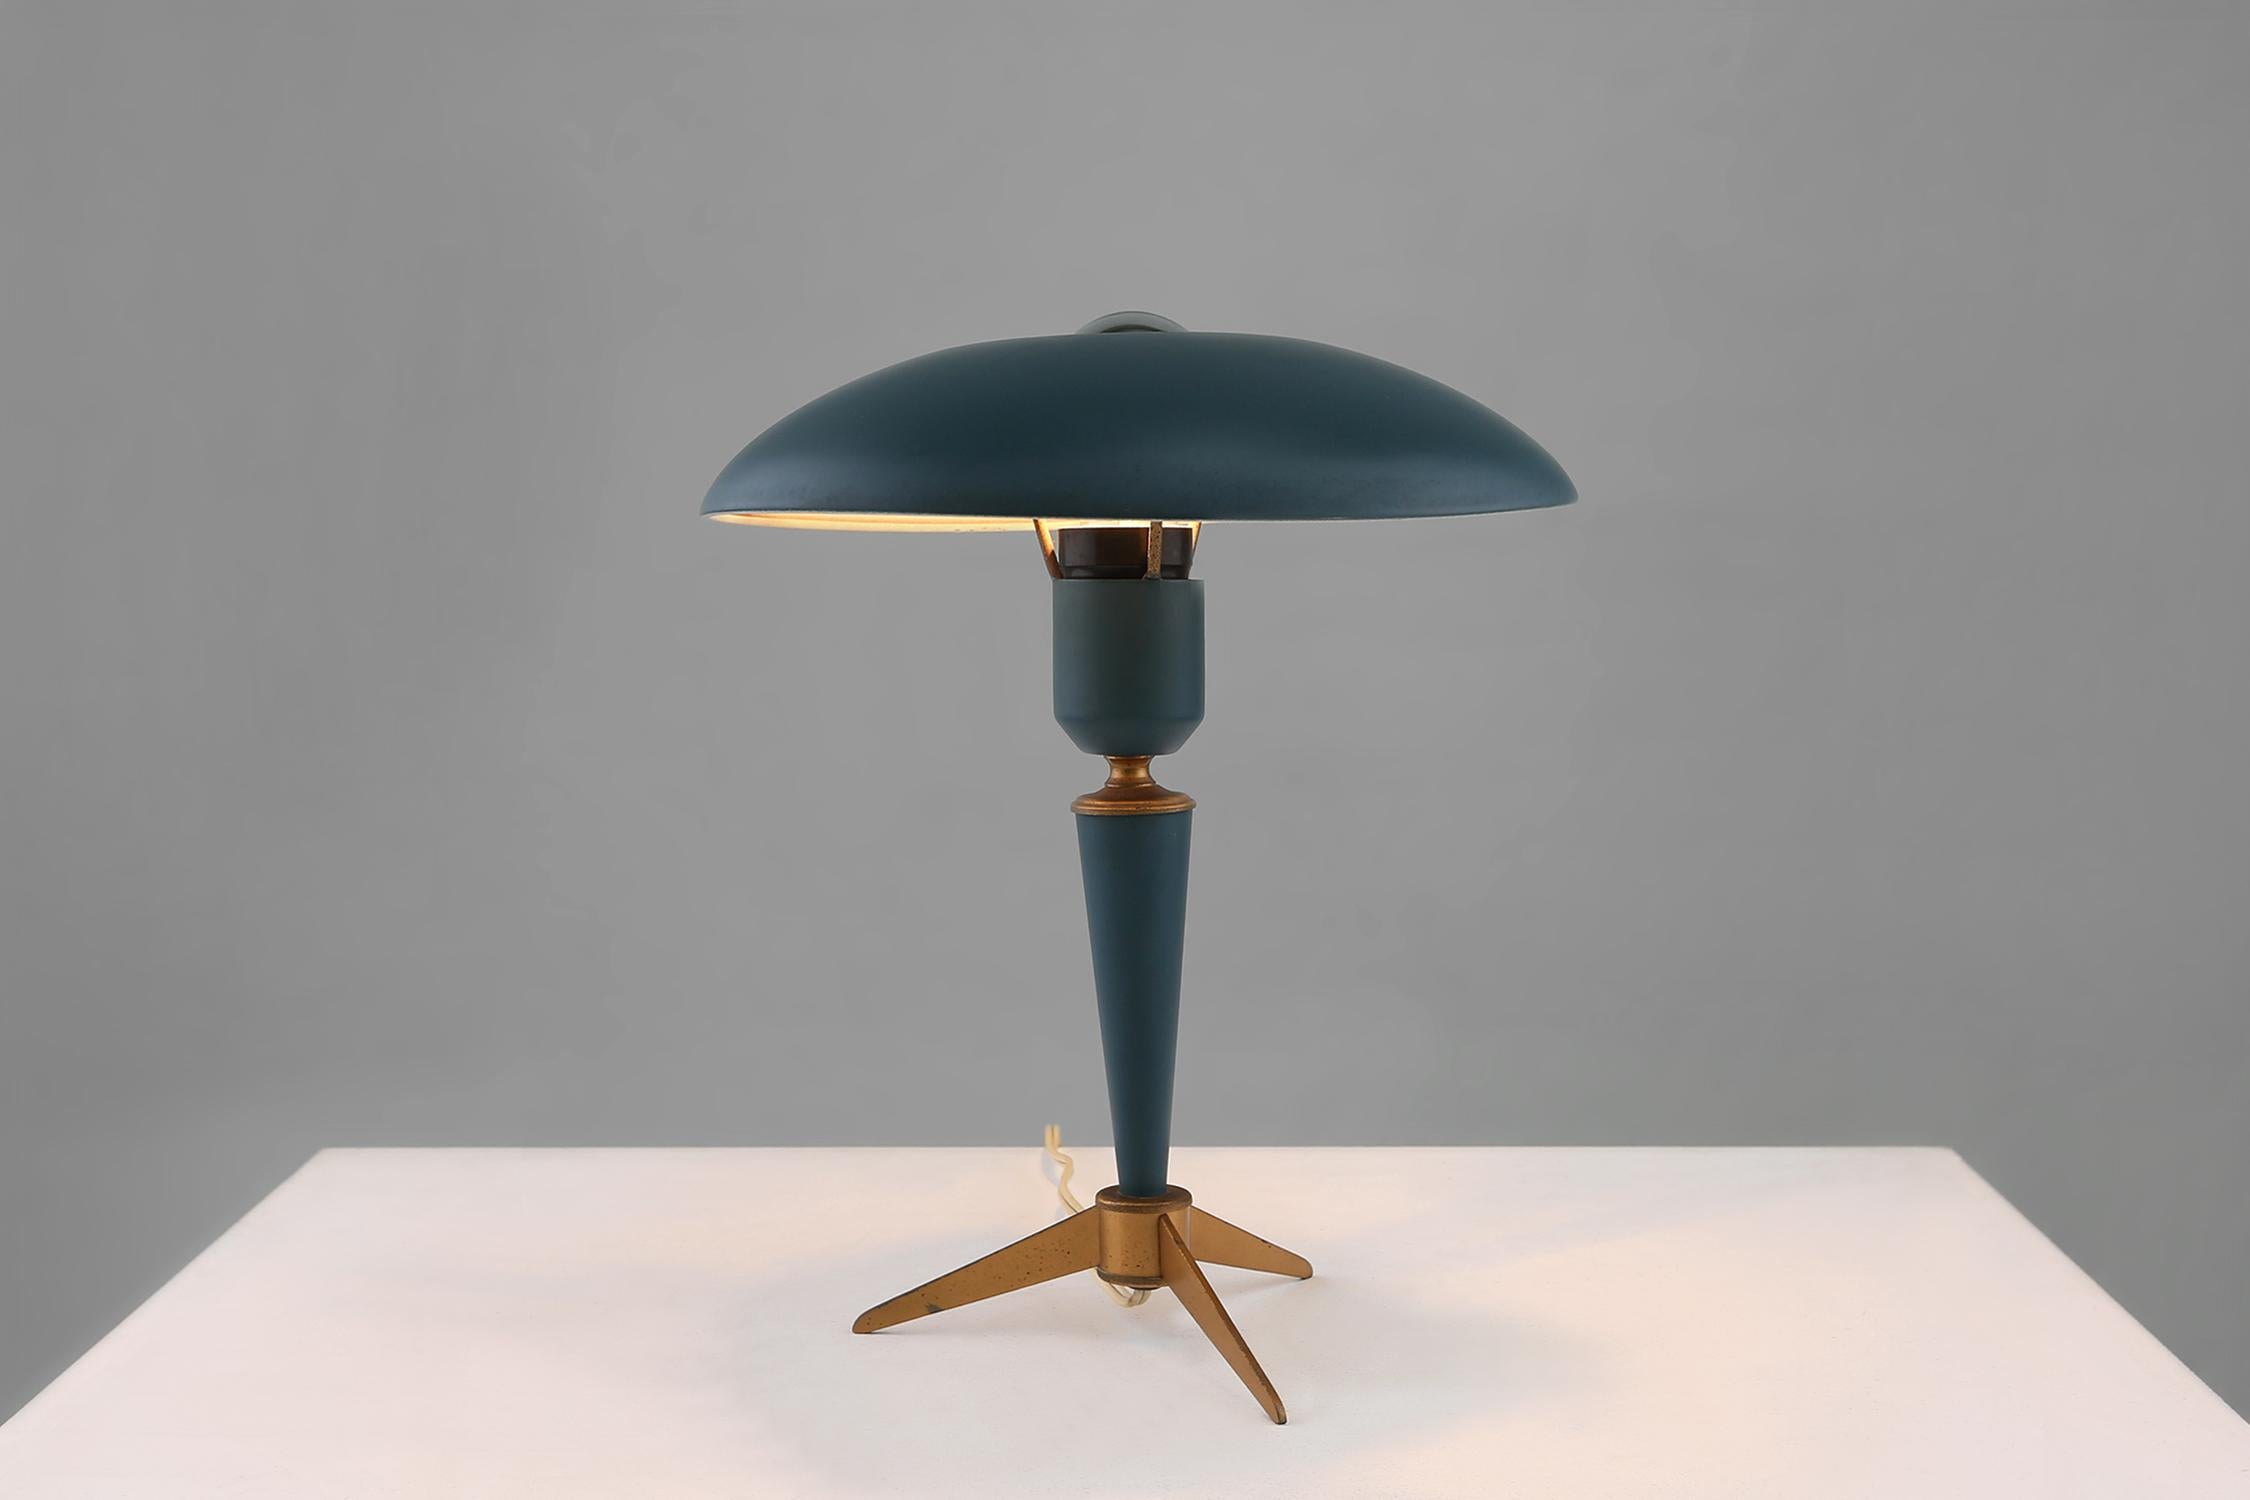 Lamp designed by Louis Kalff for Philips. is made of dark green and metal. Has a timeless design and is very elegant